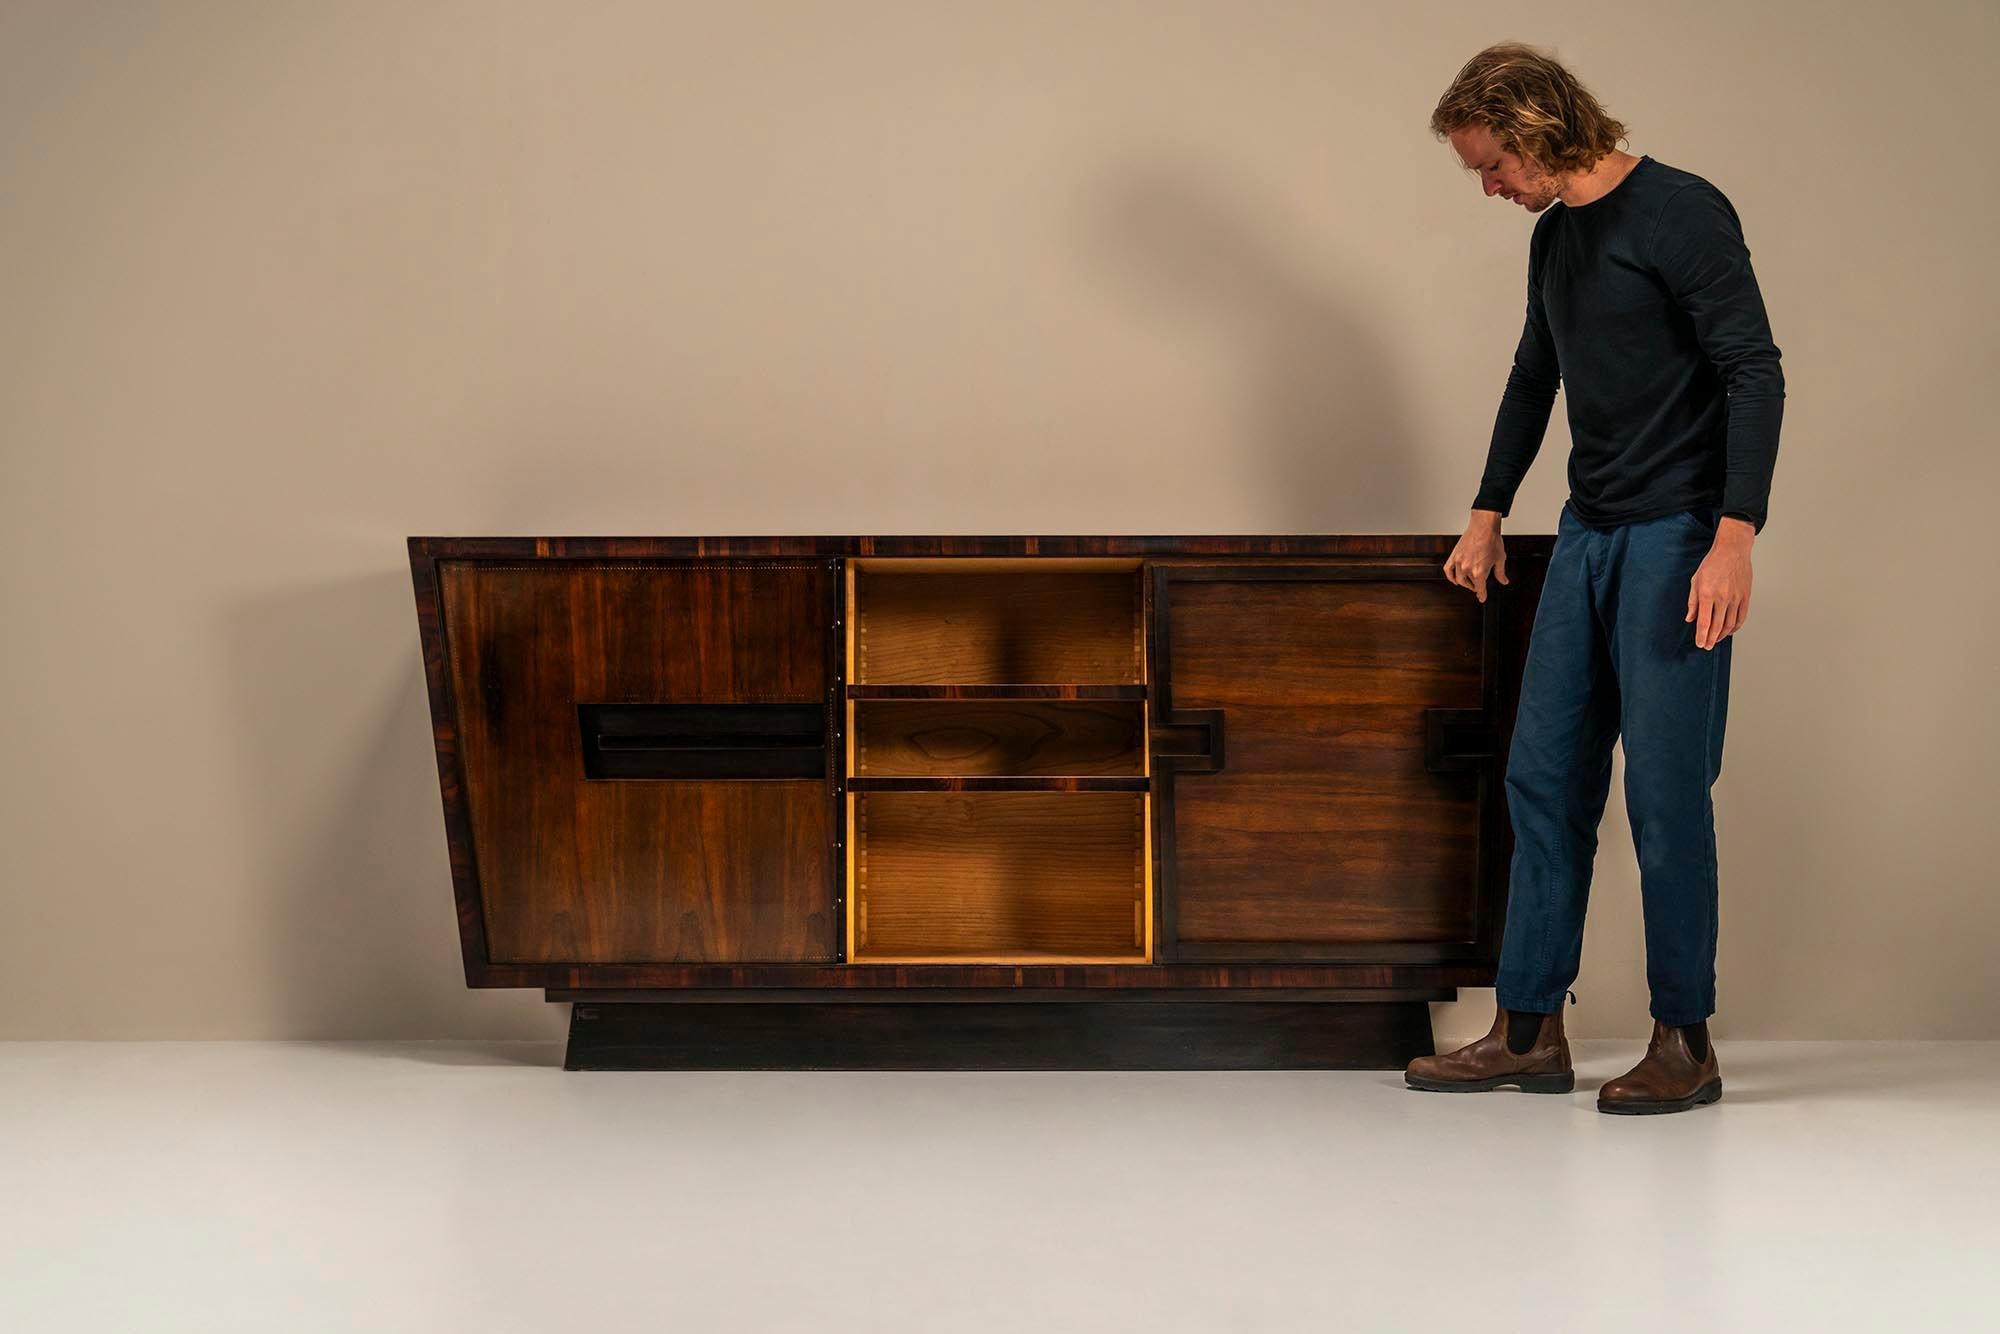 Modernist sideboard in studded rosewood by Andre Sornay.Andre Sornay was an extremely gifted furniture designer who belonged to the absolute avant-garde both conceptually and artistically. As an exponent of the Art Deco style, he had a major